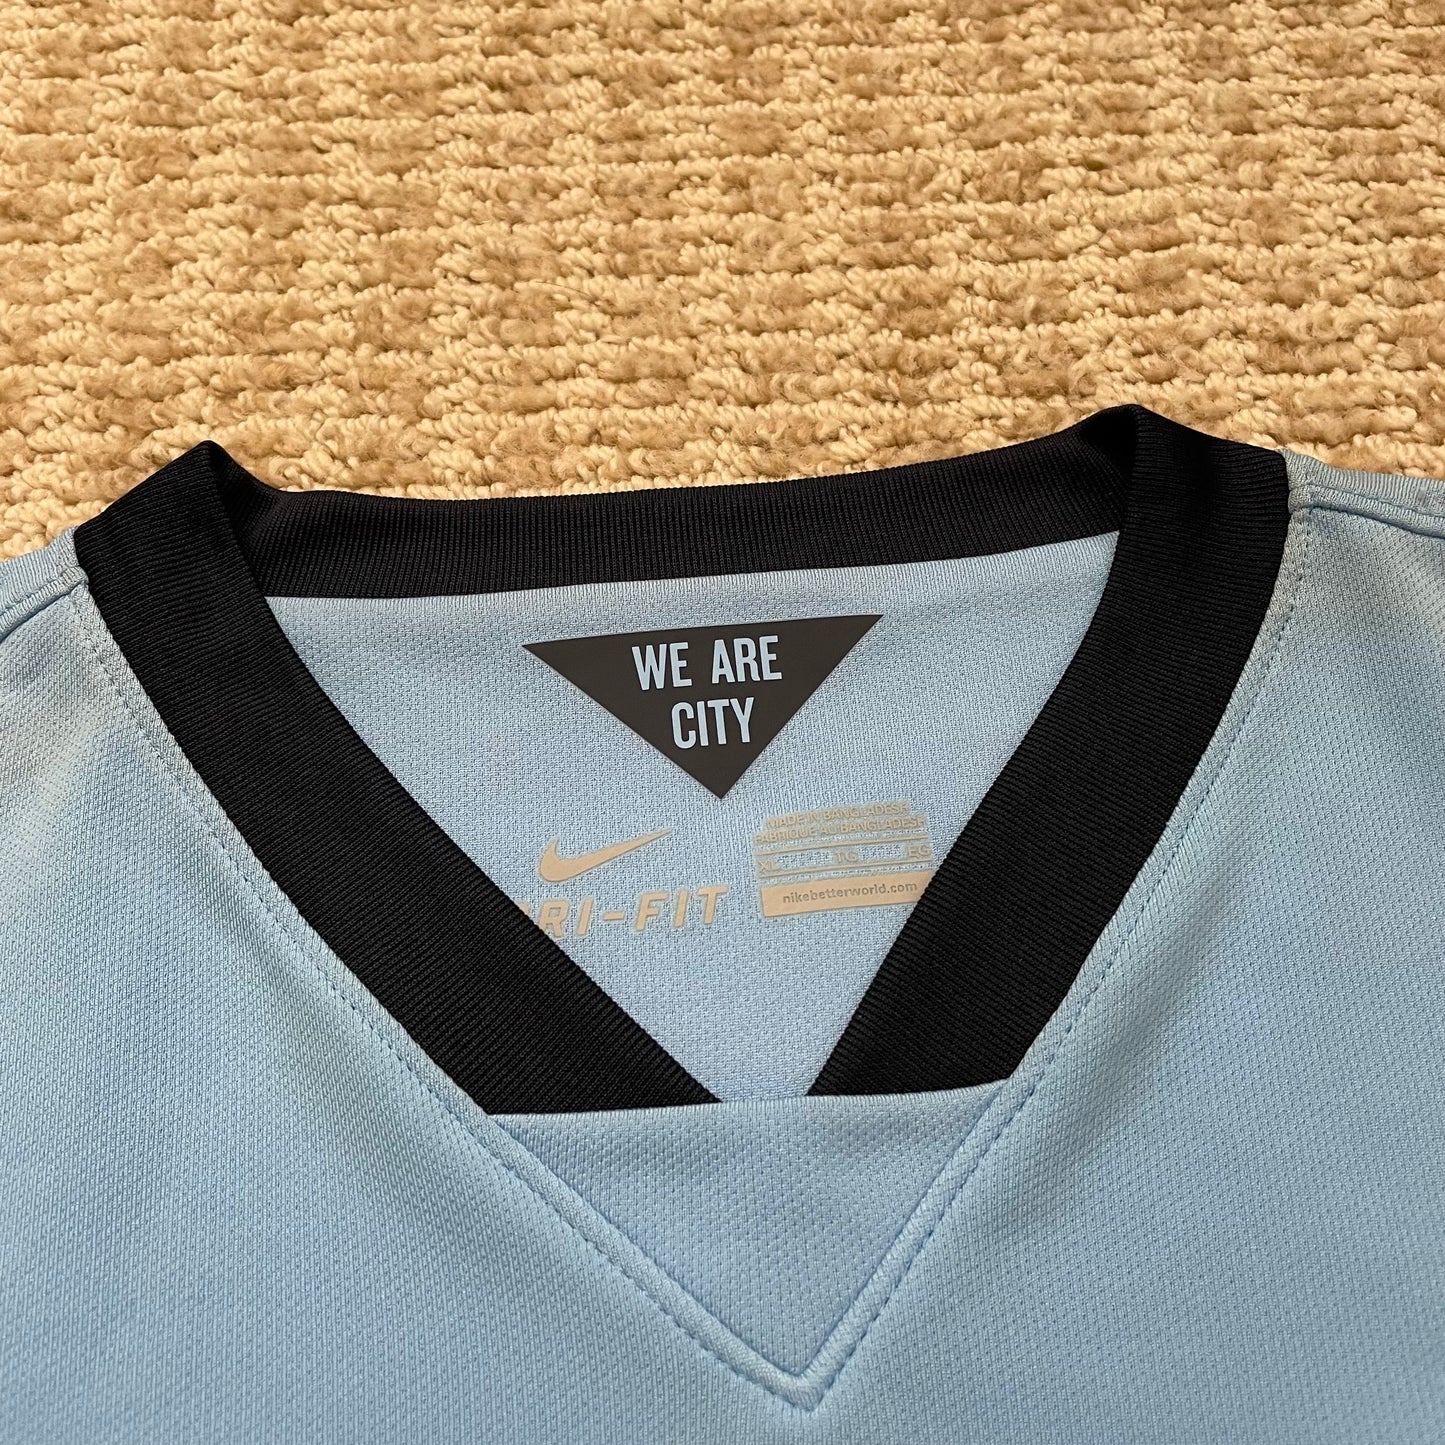 Manchester City 2014/15 home x Sergio 'Kun' Agüero #16 (XL) *BRAND NEW WITH TAGS